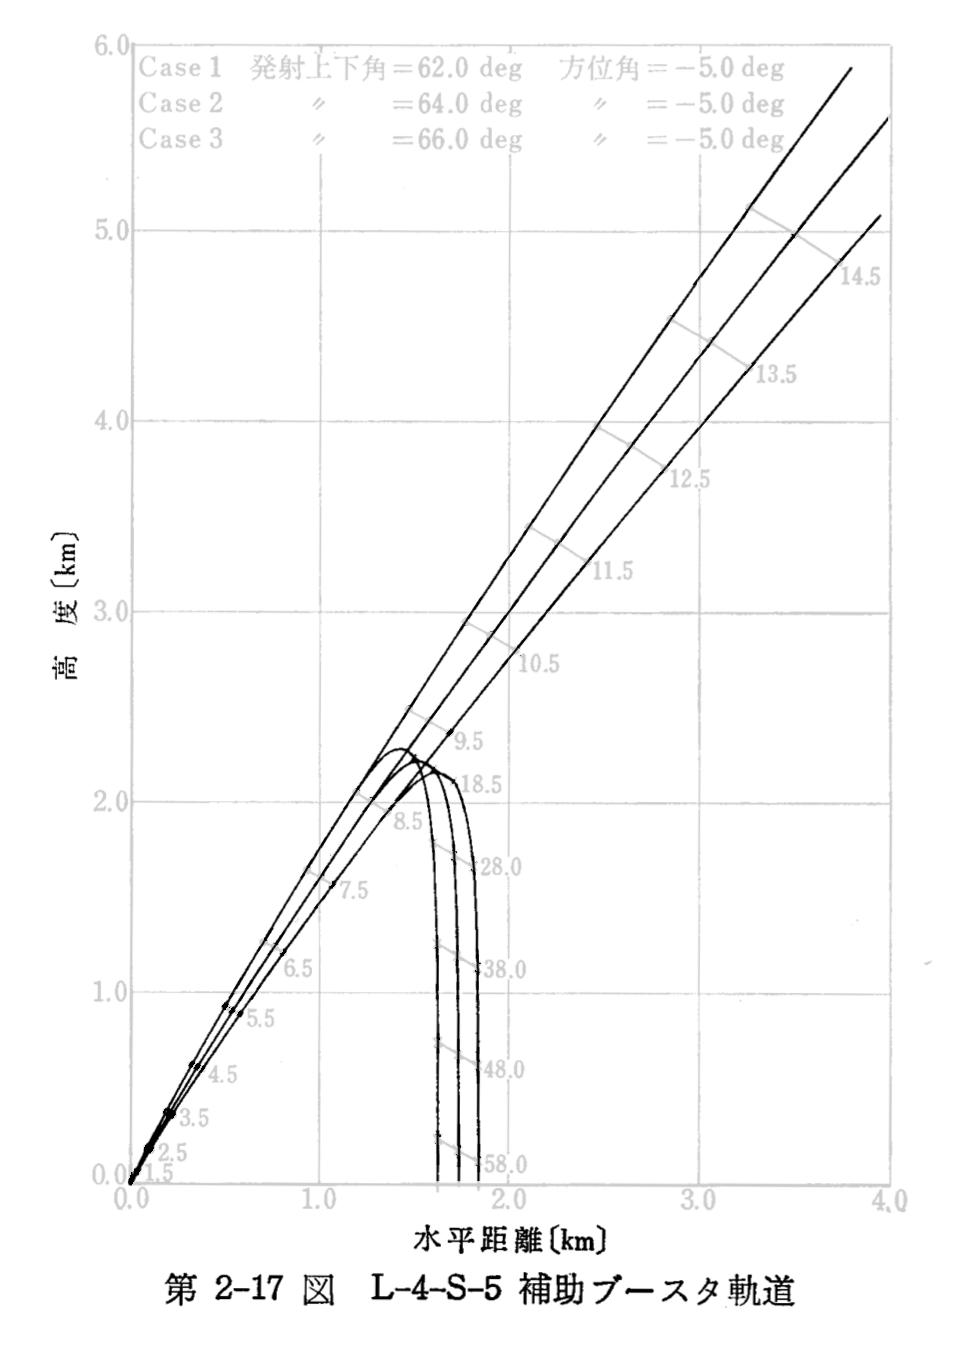 Photocopied chart: Modeled trajectory from L-4S-5, first stage and booster